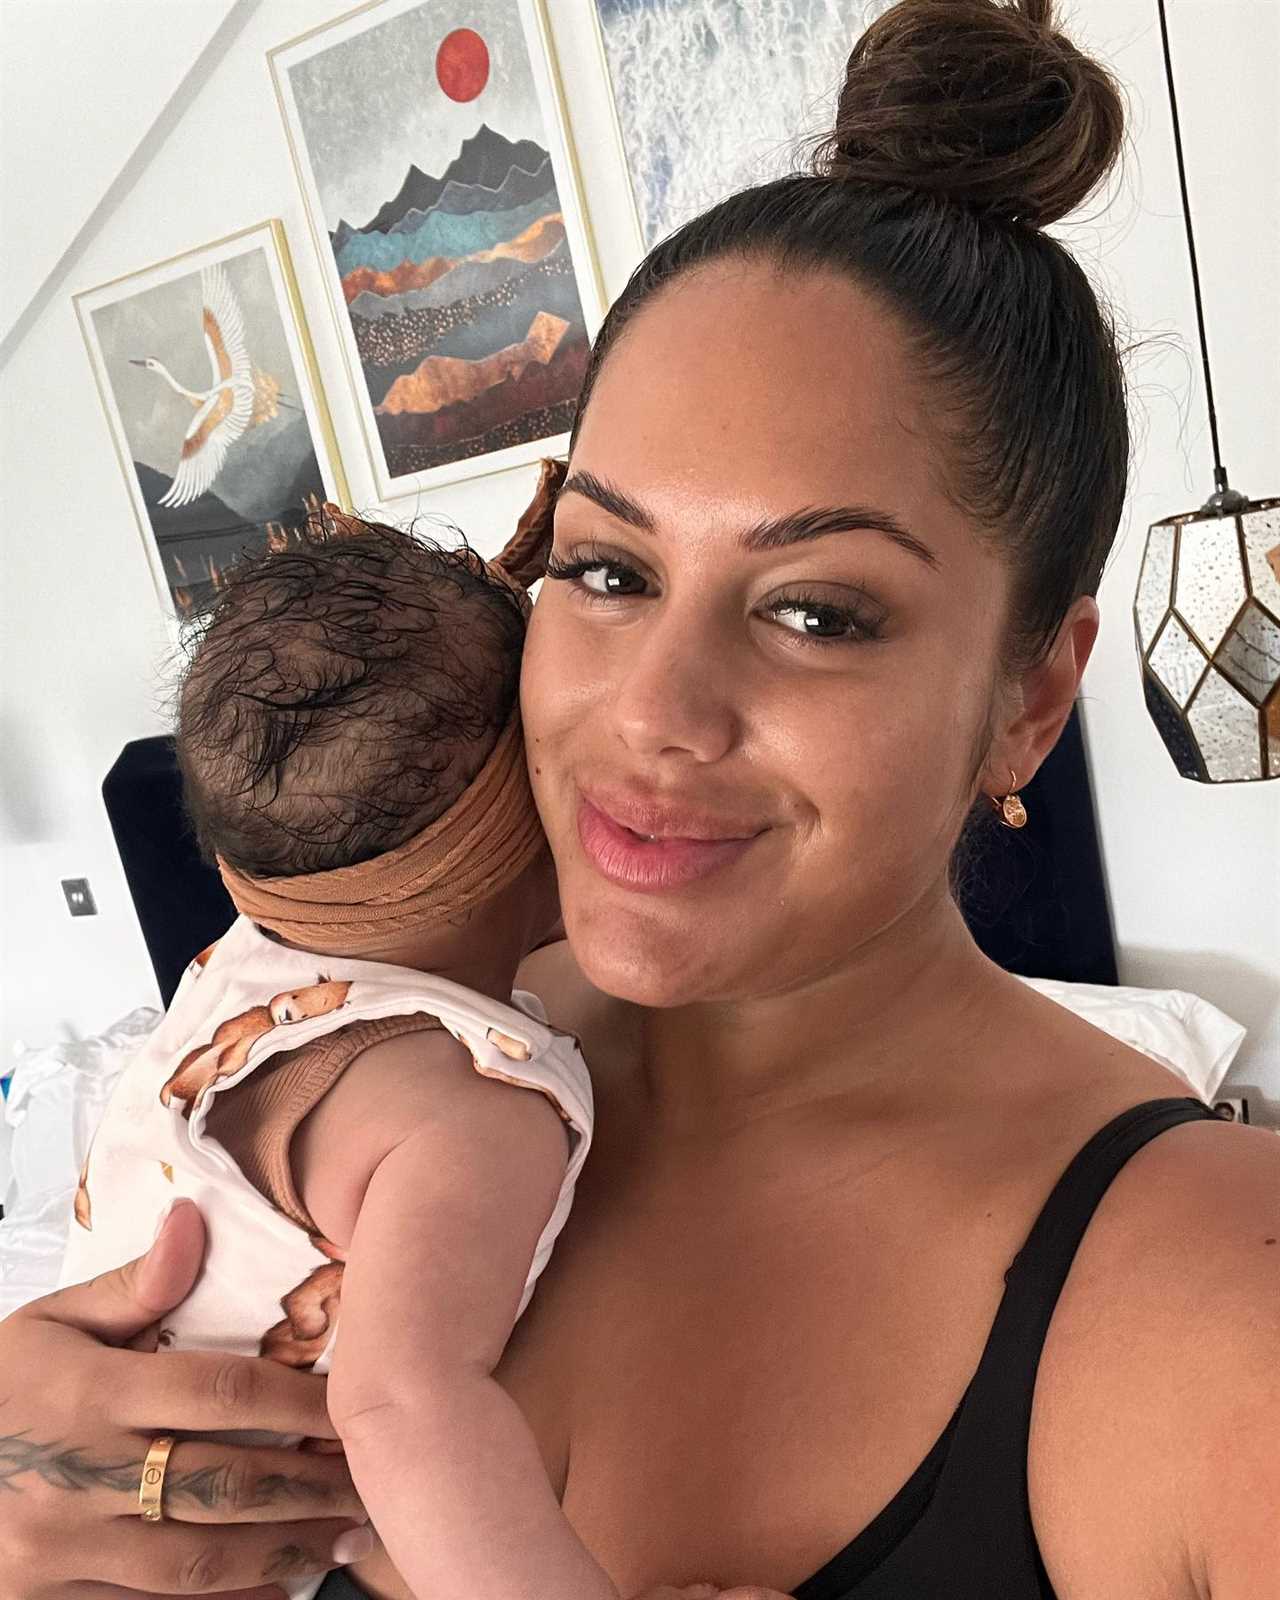 Malin Andersson rushes baby to hospital and says she feels ‘so depressed and rundown’